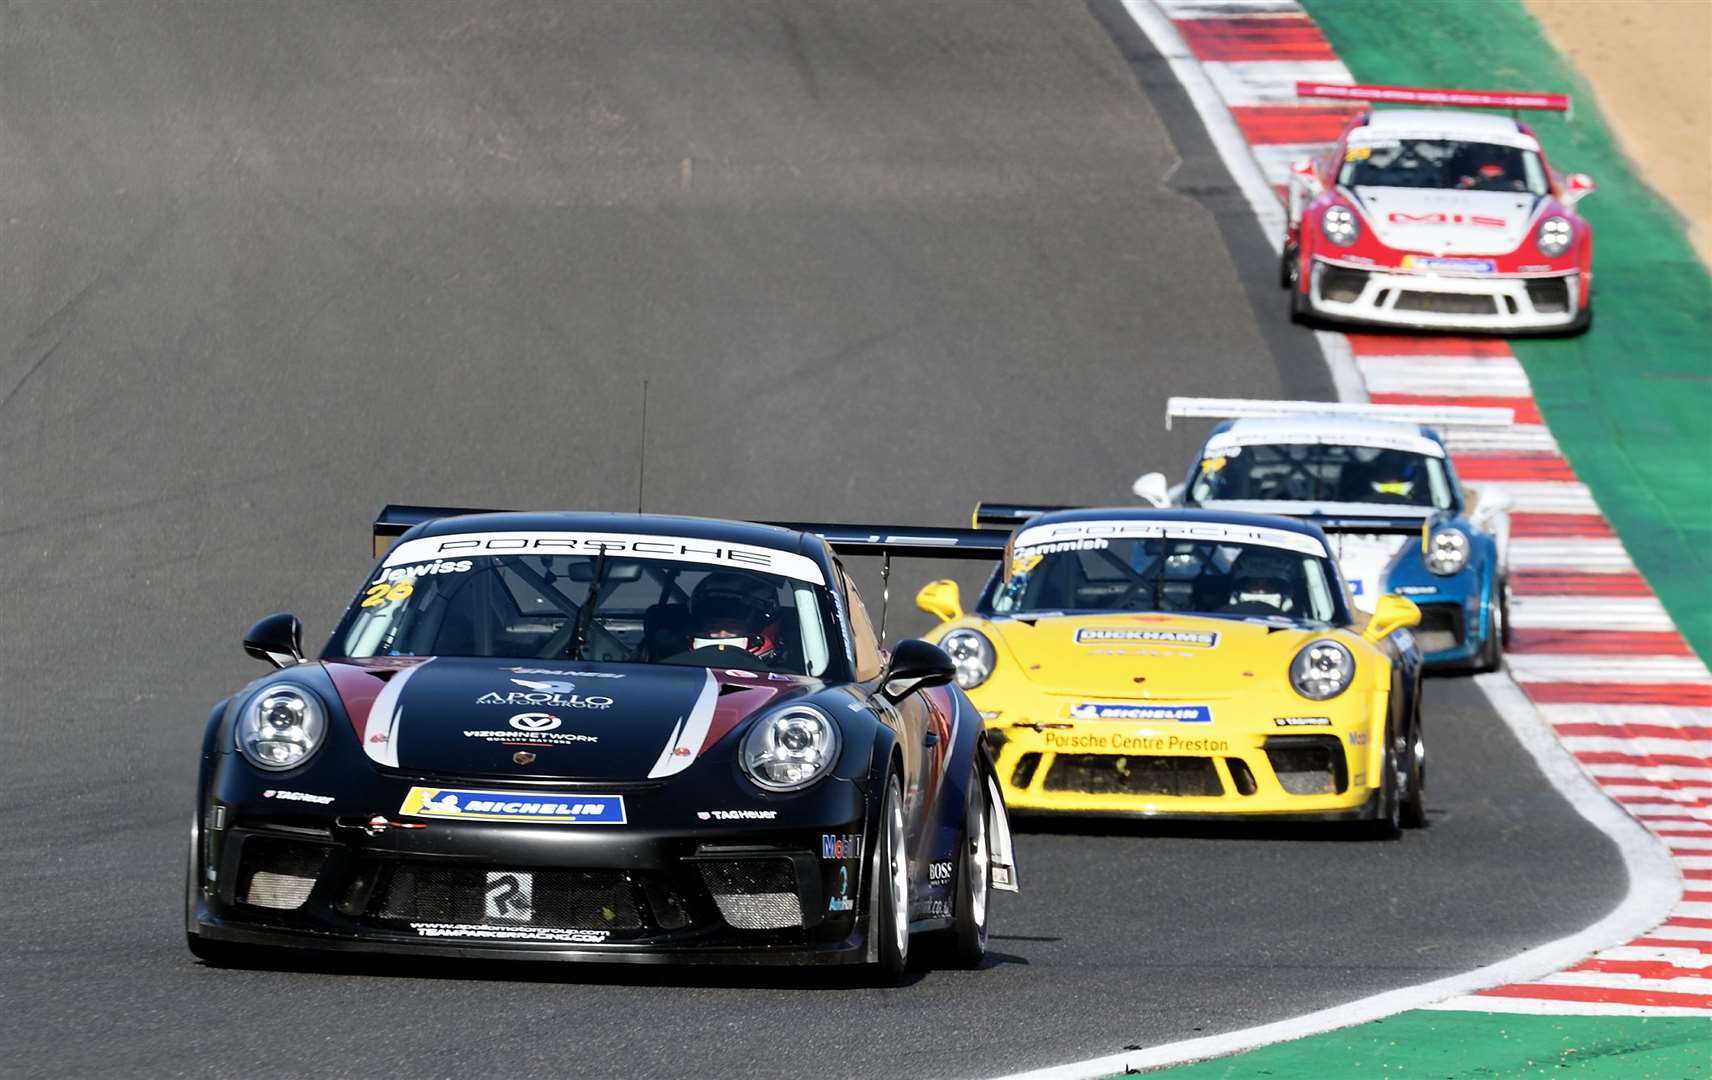 Switching from single-seaters to sportcars, Maidstone's Kiern Jewiss starred in the Porsche Carrera Cup this season, winning the rookie championship and fighting for the overall crown. He finished third in the title race, beating team-mate and outgoing champion Harry King